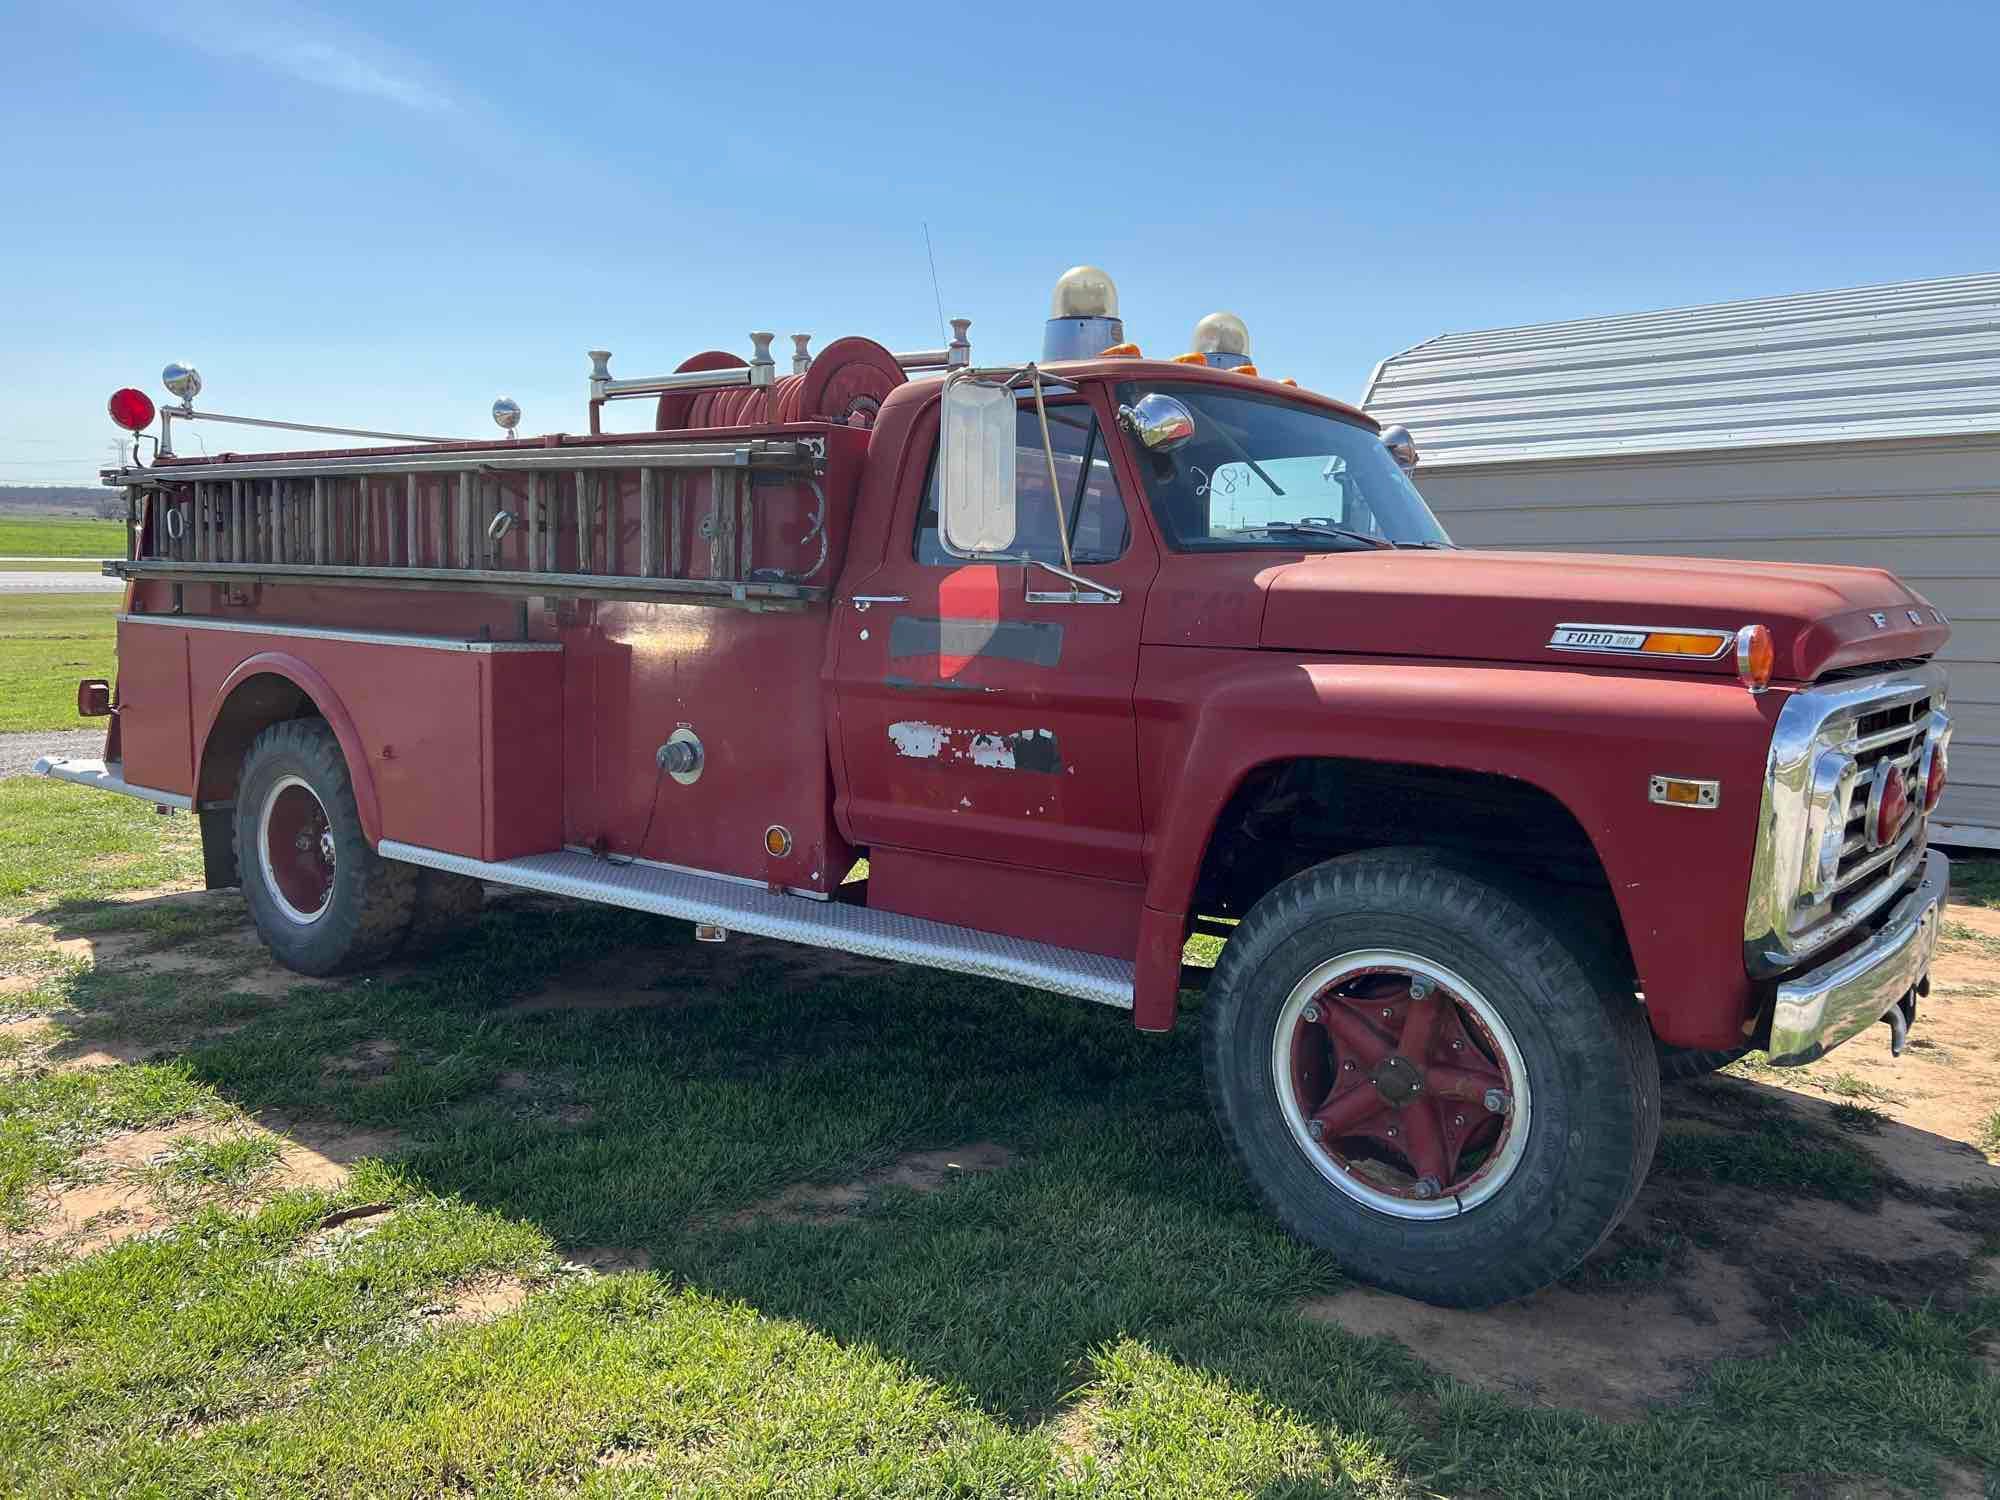 FORD 600 FIRE TRUCK 1970 MODEL 5 SPEED TRANSMISSION WITH A 2 SPEED READ END 10,267 MILES RUNS,